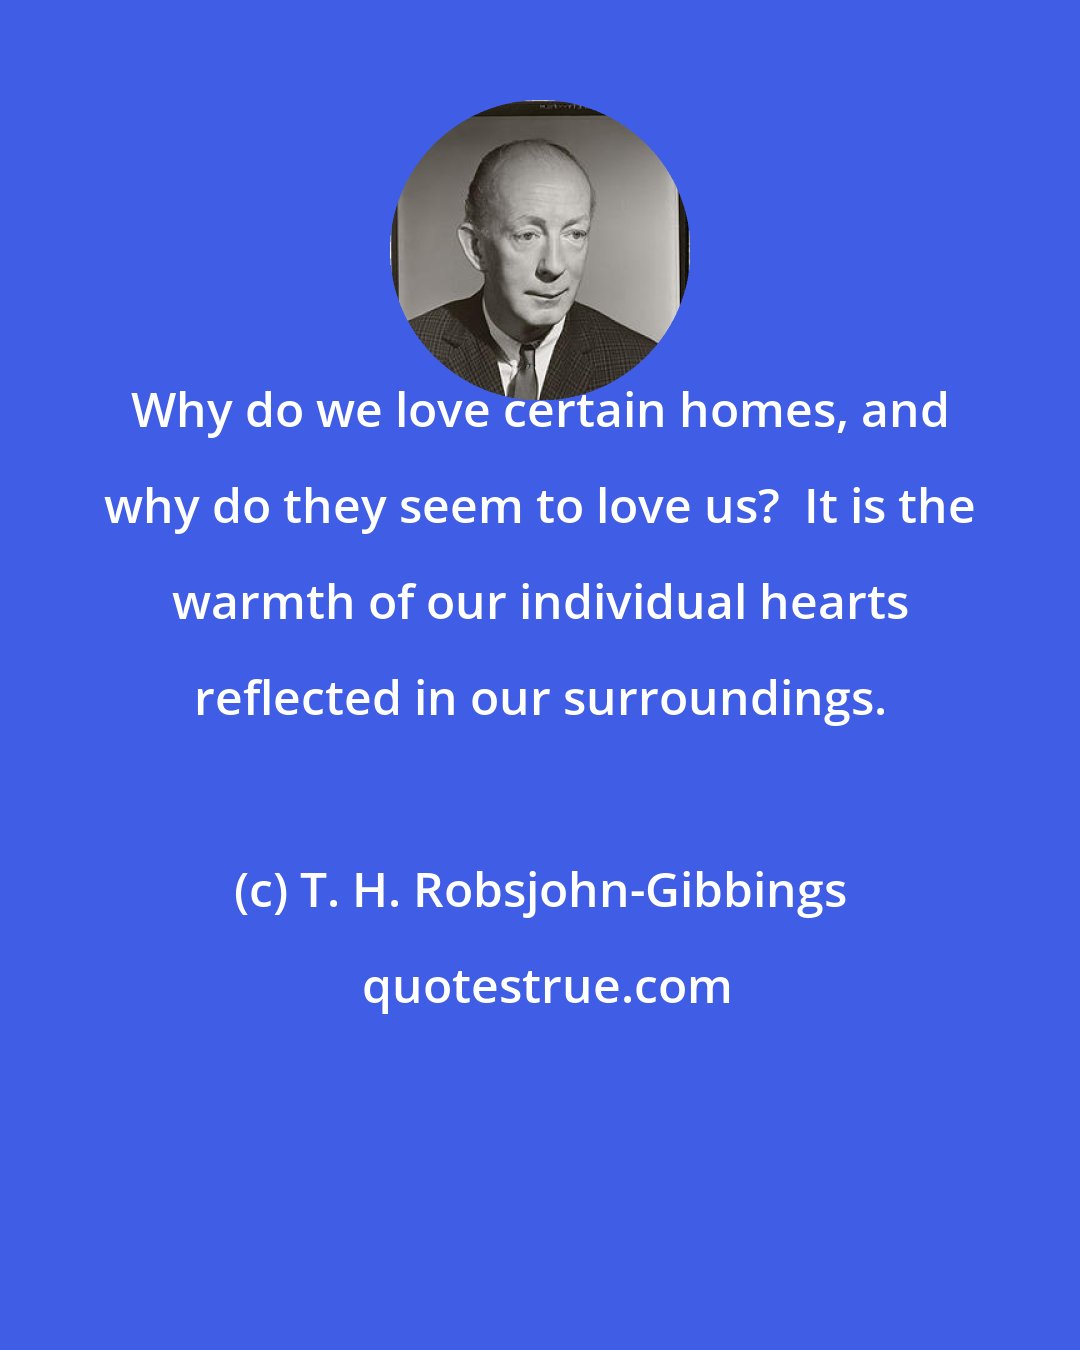 T. H. Robsjohn-Gibbings: Why do we love certain homes, and why do they seem to love us?  It is the warmth of our individual hearts reflected in our surroundings.